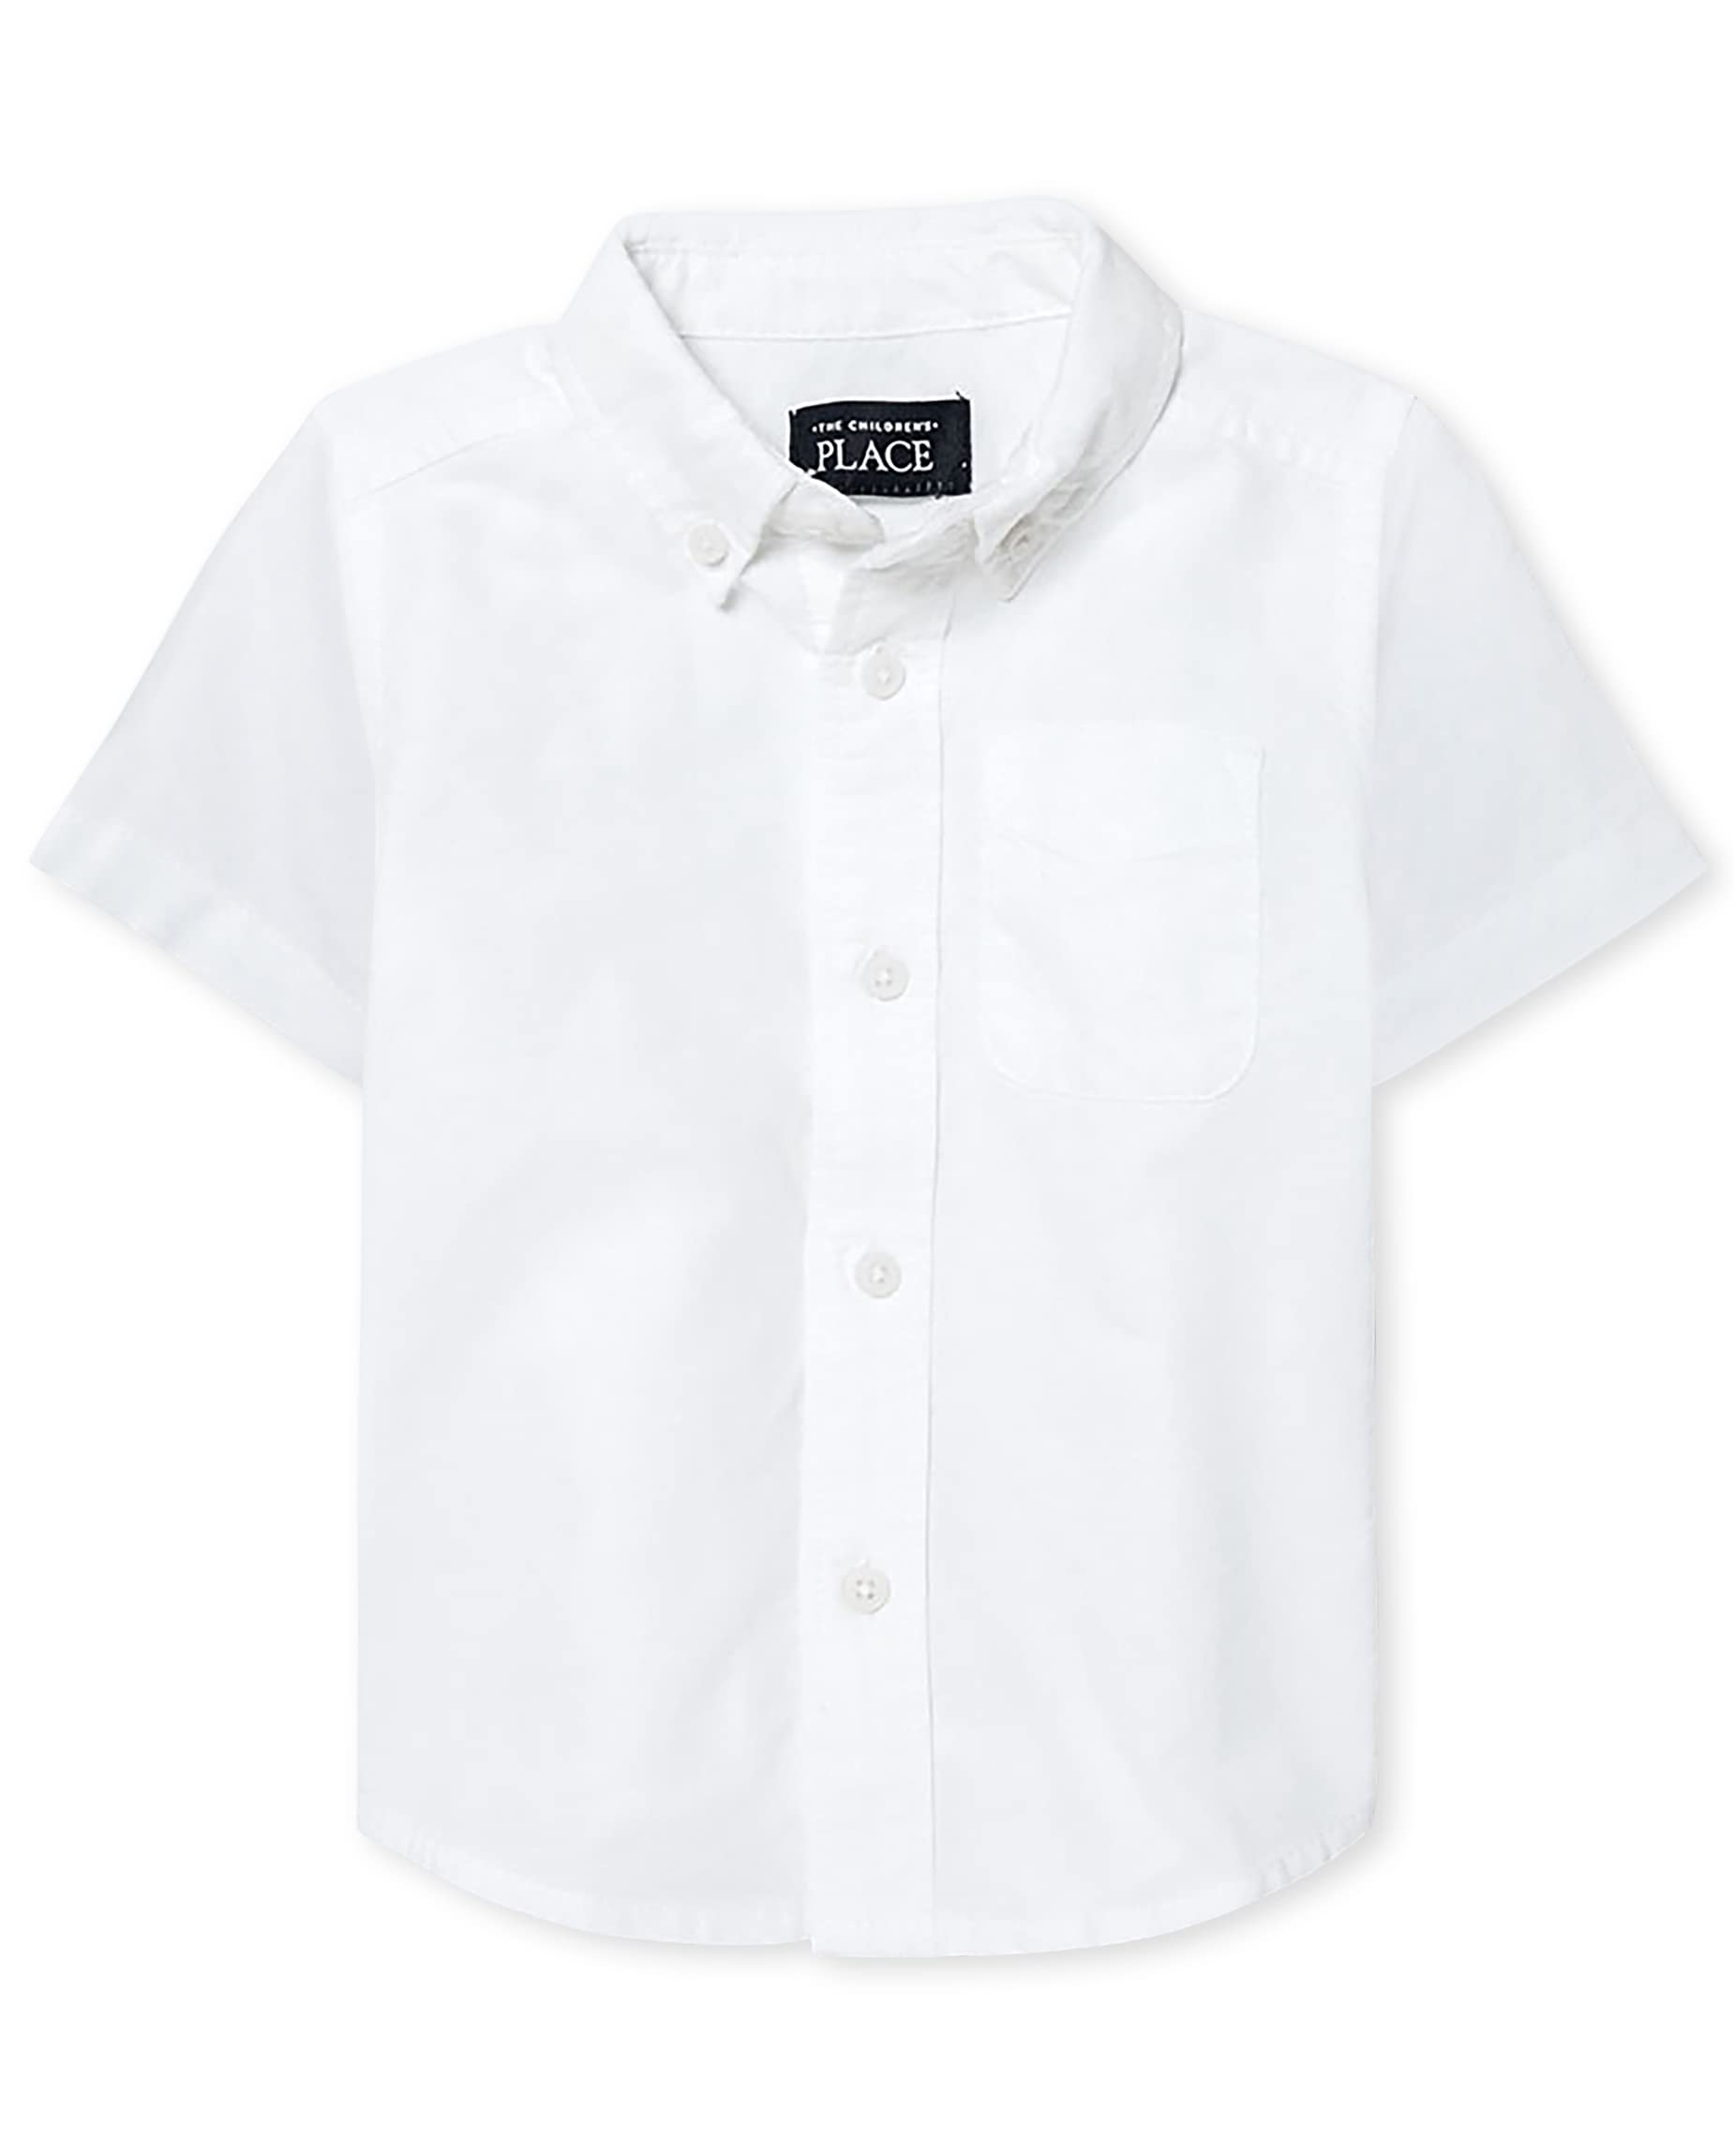 The Children's Place Single and Toddler Boys Short Sleeve Oxford Button Down Shirt